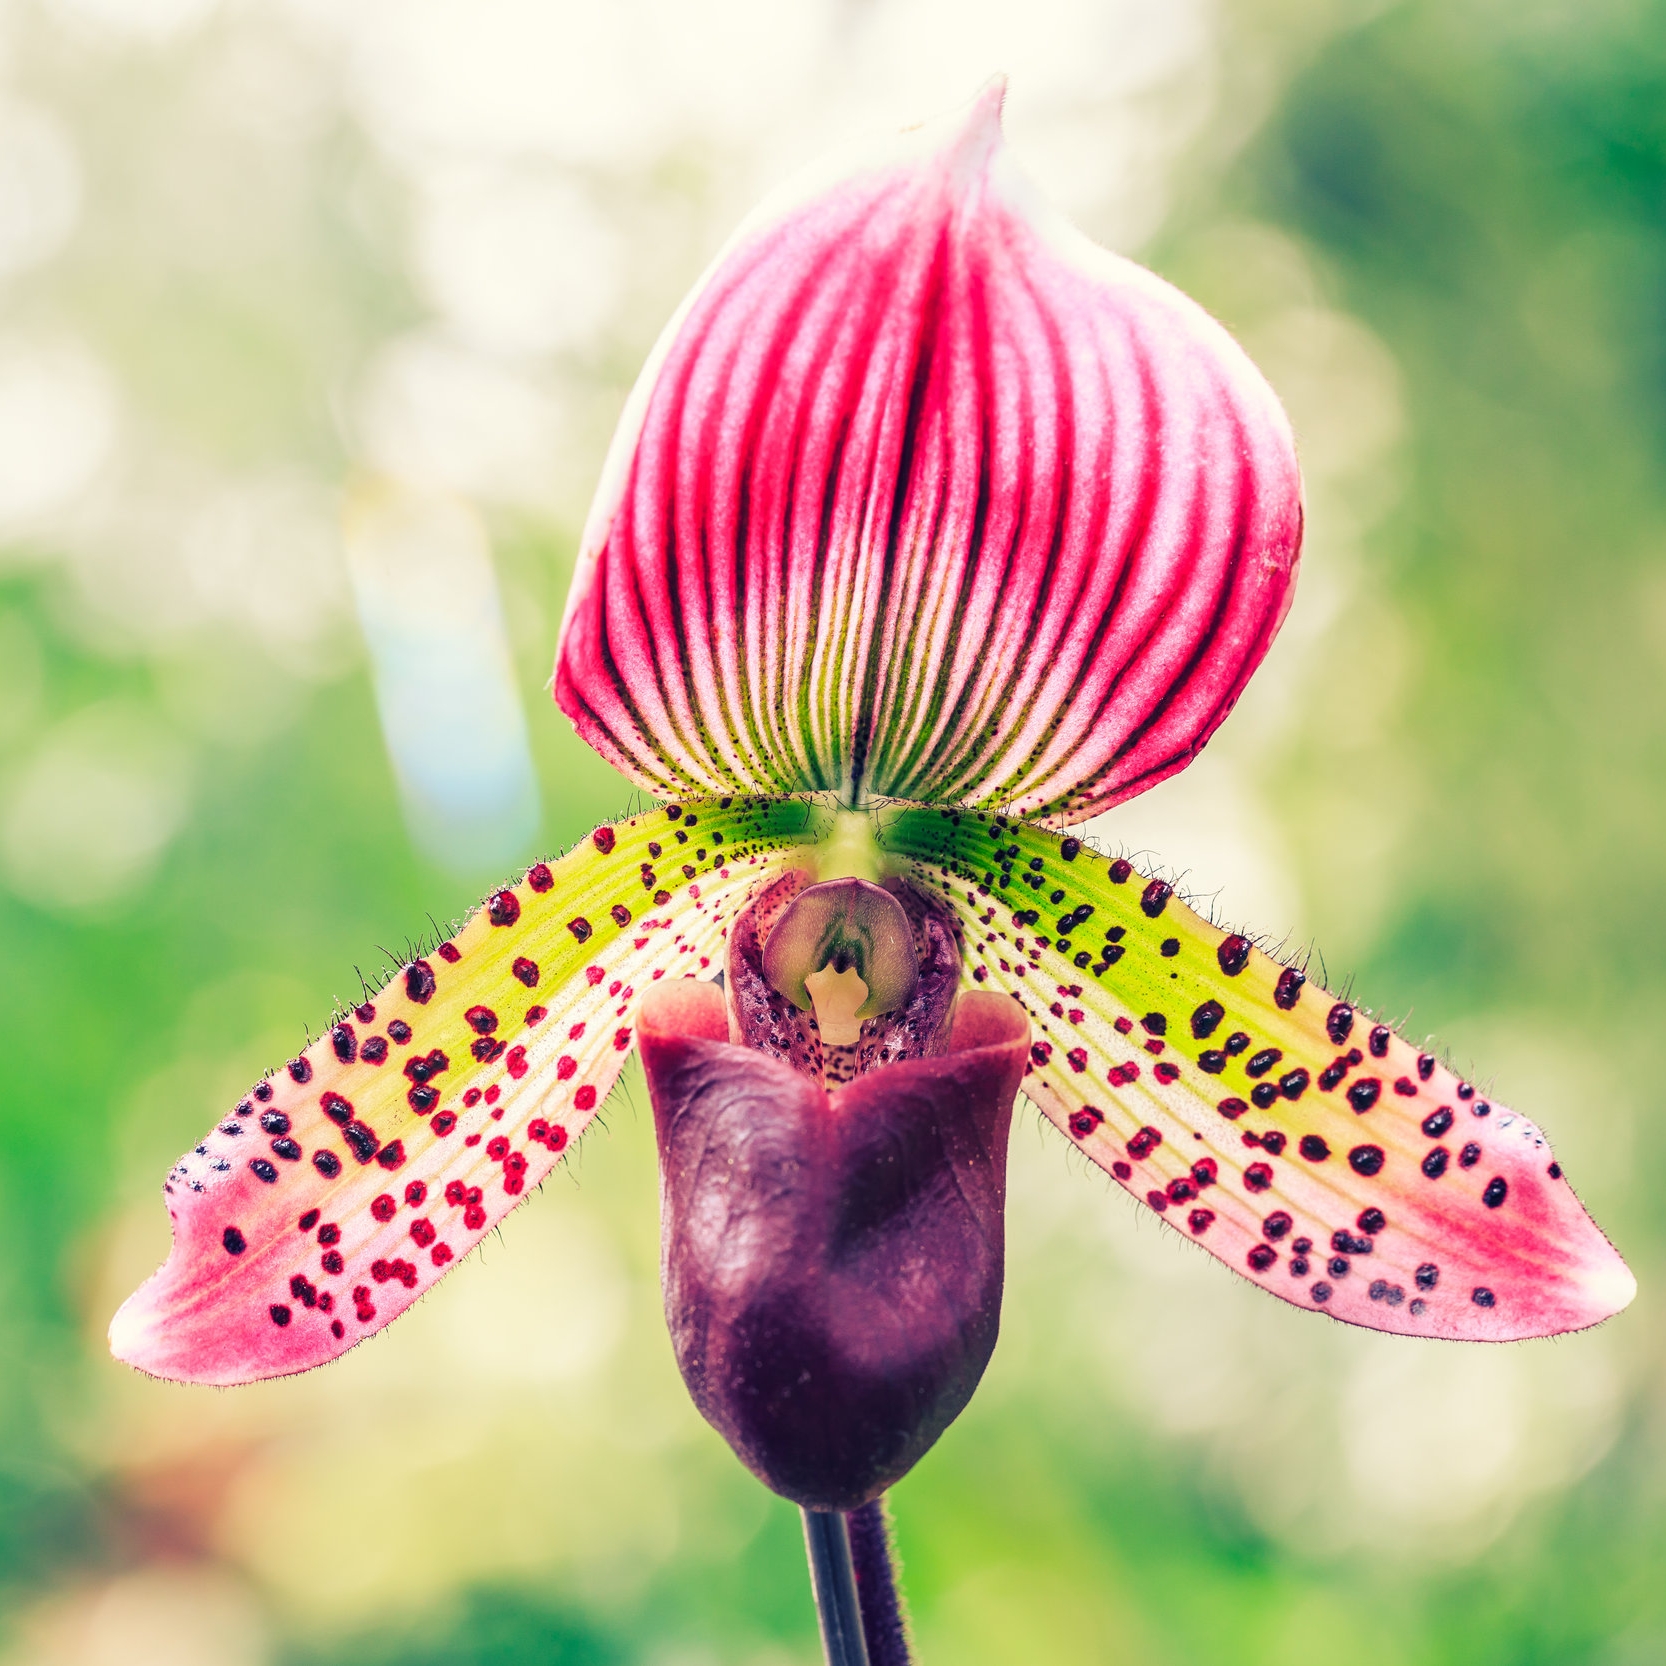 Paphiopedilum (Lady Slipper Orchid) - Light: A low light orchid, and east facing window is best. Temperature: 60°-65° at night. 70°-75° during the day.Watering: Every five days in bark substrate. Water in sink and allow to drain completely.Bloom time: Varies/4-6 weeksFertilizer:  Balanced orchid fertilizer (20-20-20) weekly at diluted strength of 1/4. Flush monthly to remove accumulated salts.